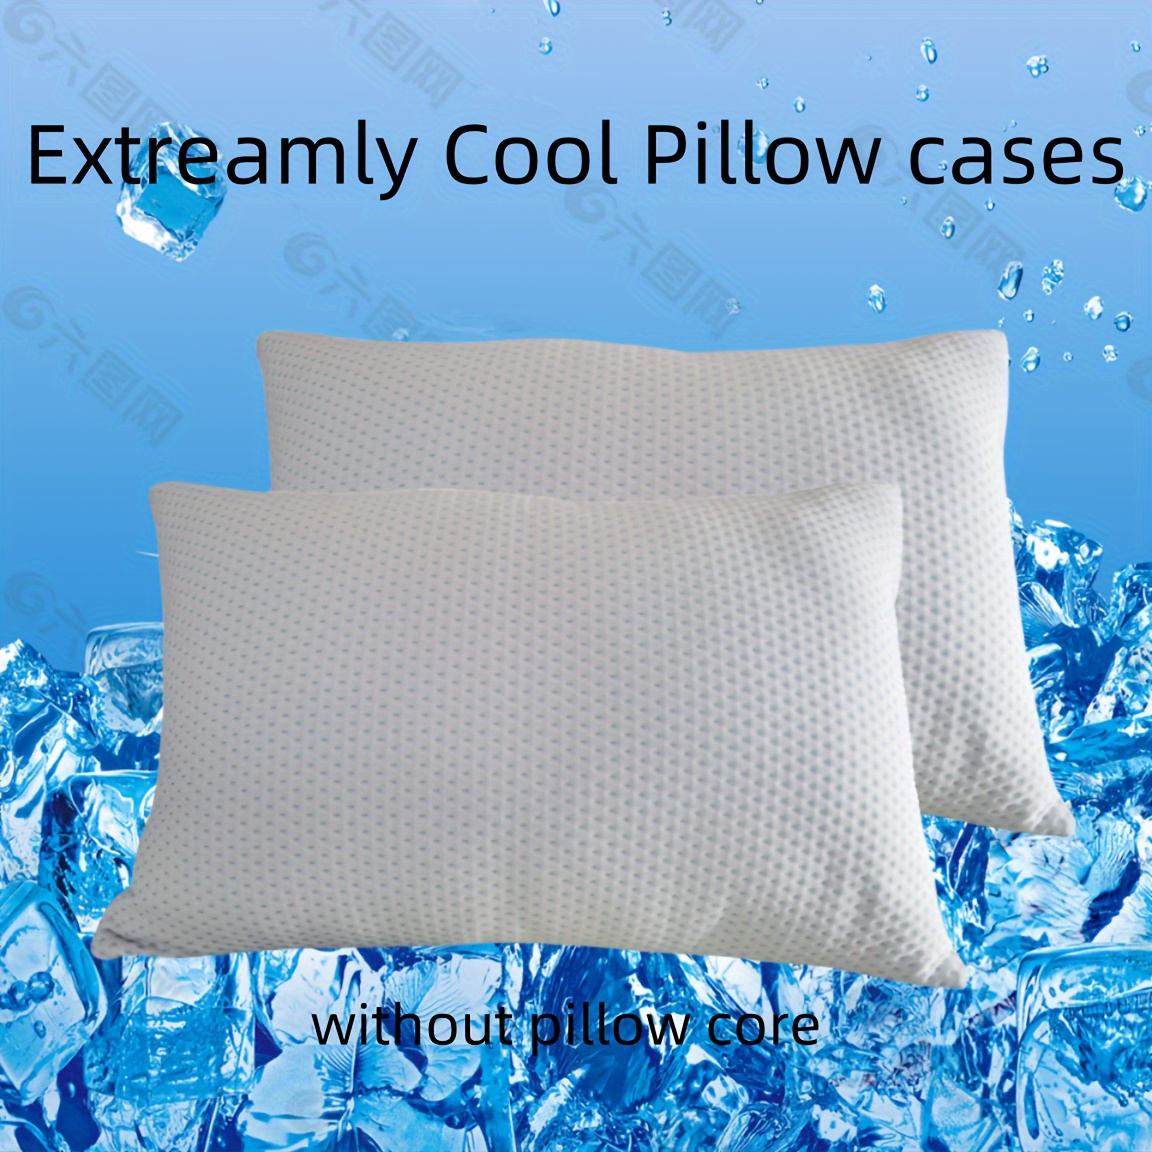 

2pcs Cooling Pillow Cases, Cooling & Polyester Fiber, Anti-static, Skin-friendly, Machine Washable With Zipper Pillow Cases, No Core